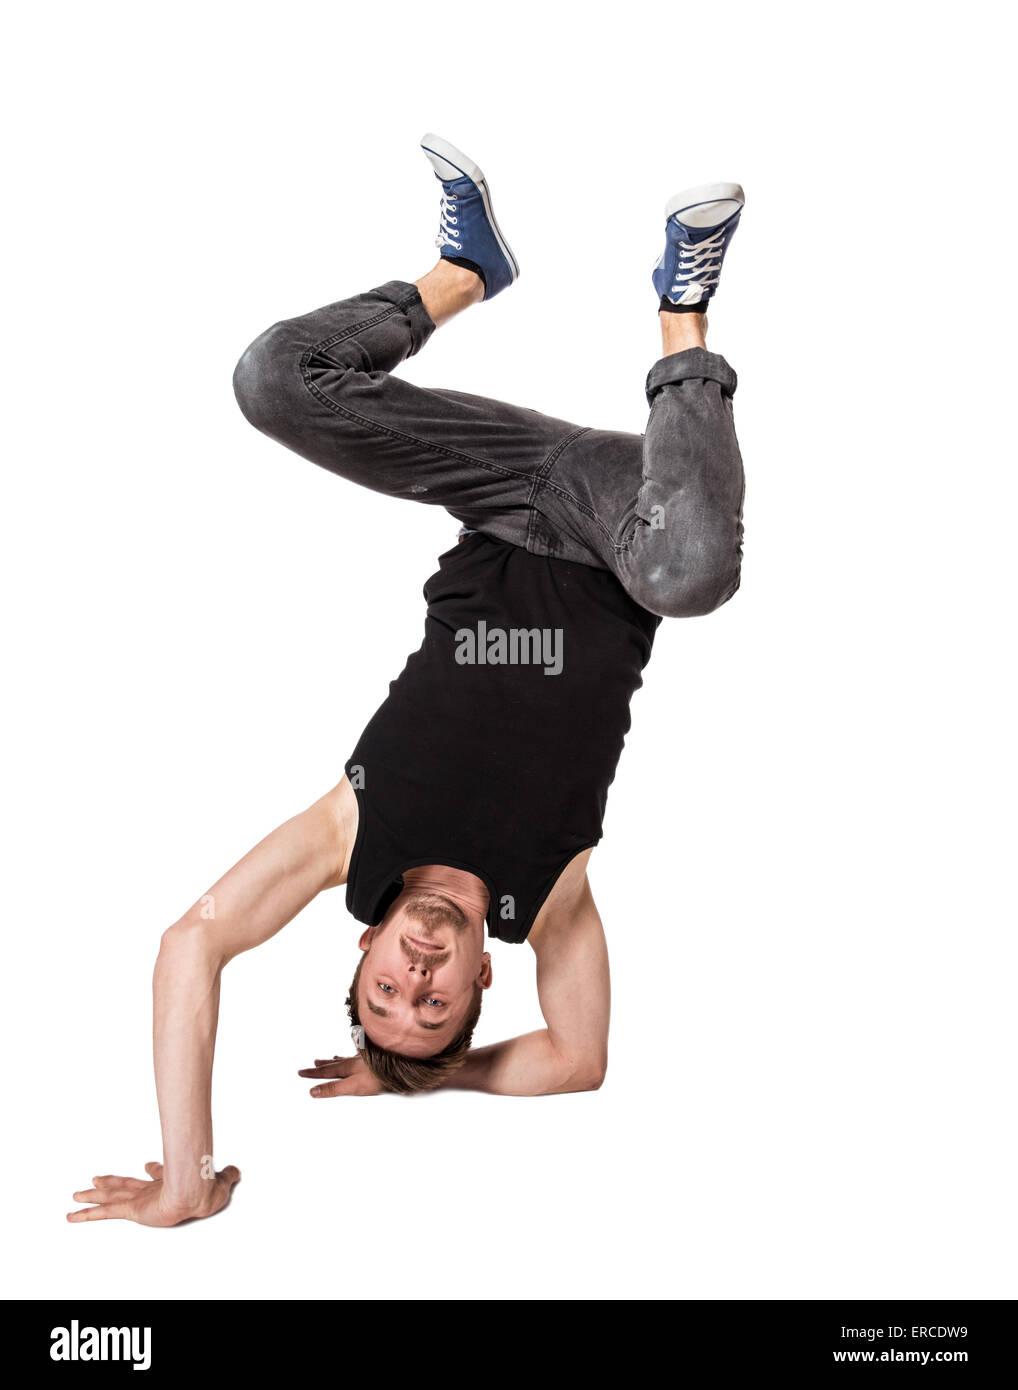 Break dancer doing one handed handstand against a white background Stock Photo